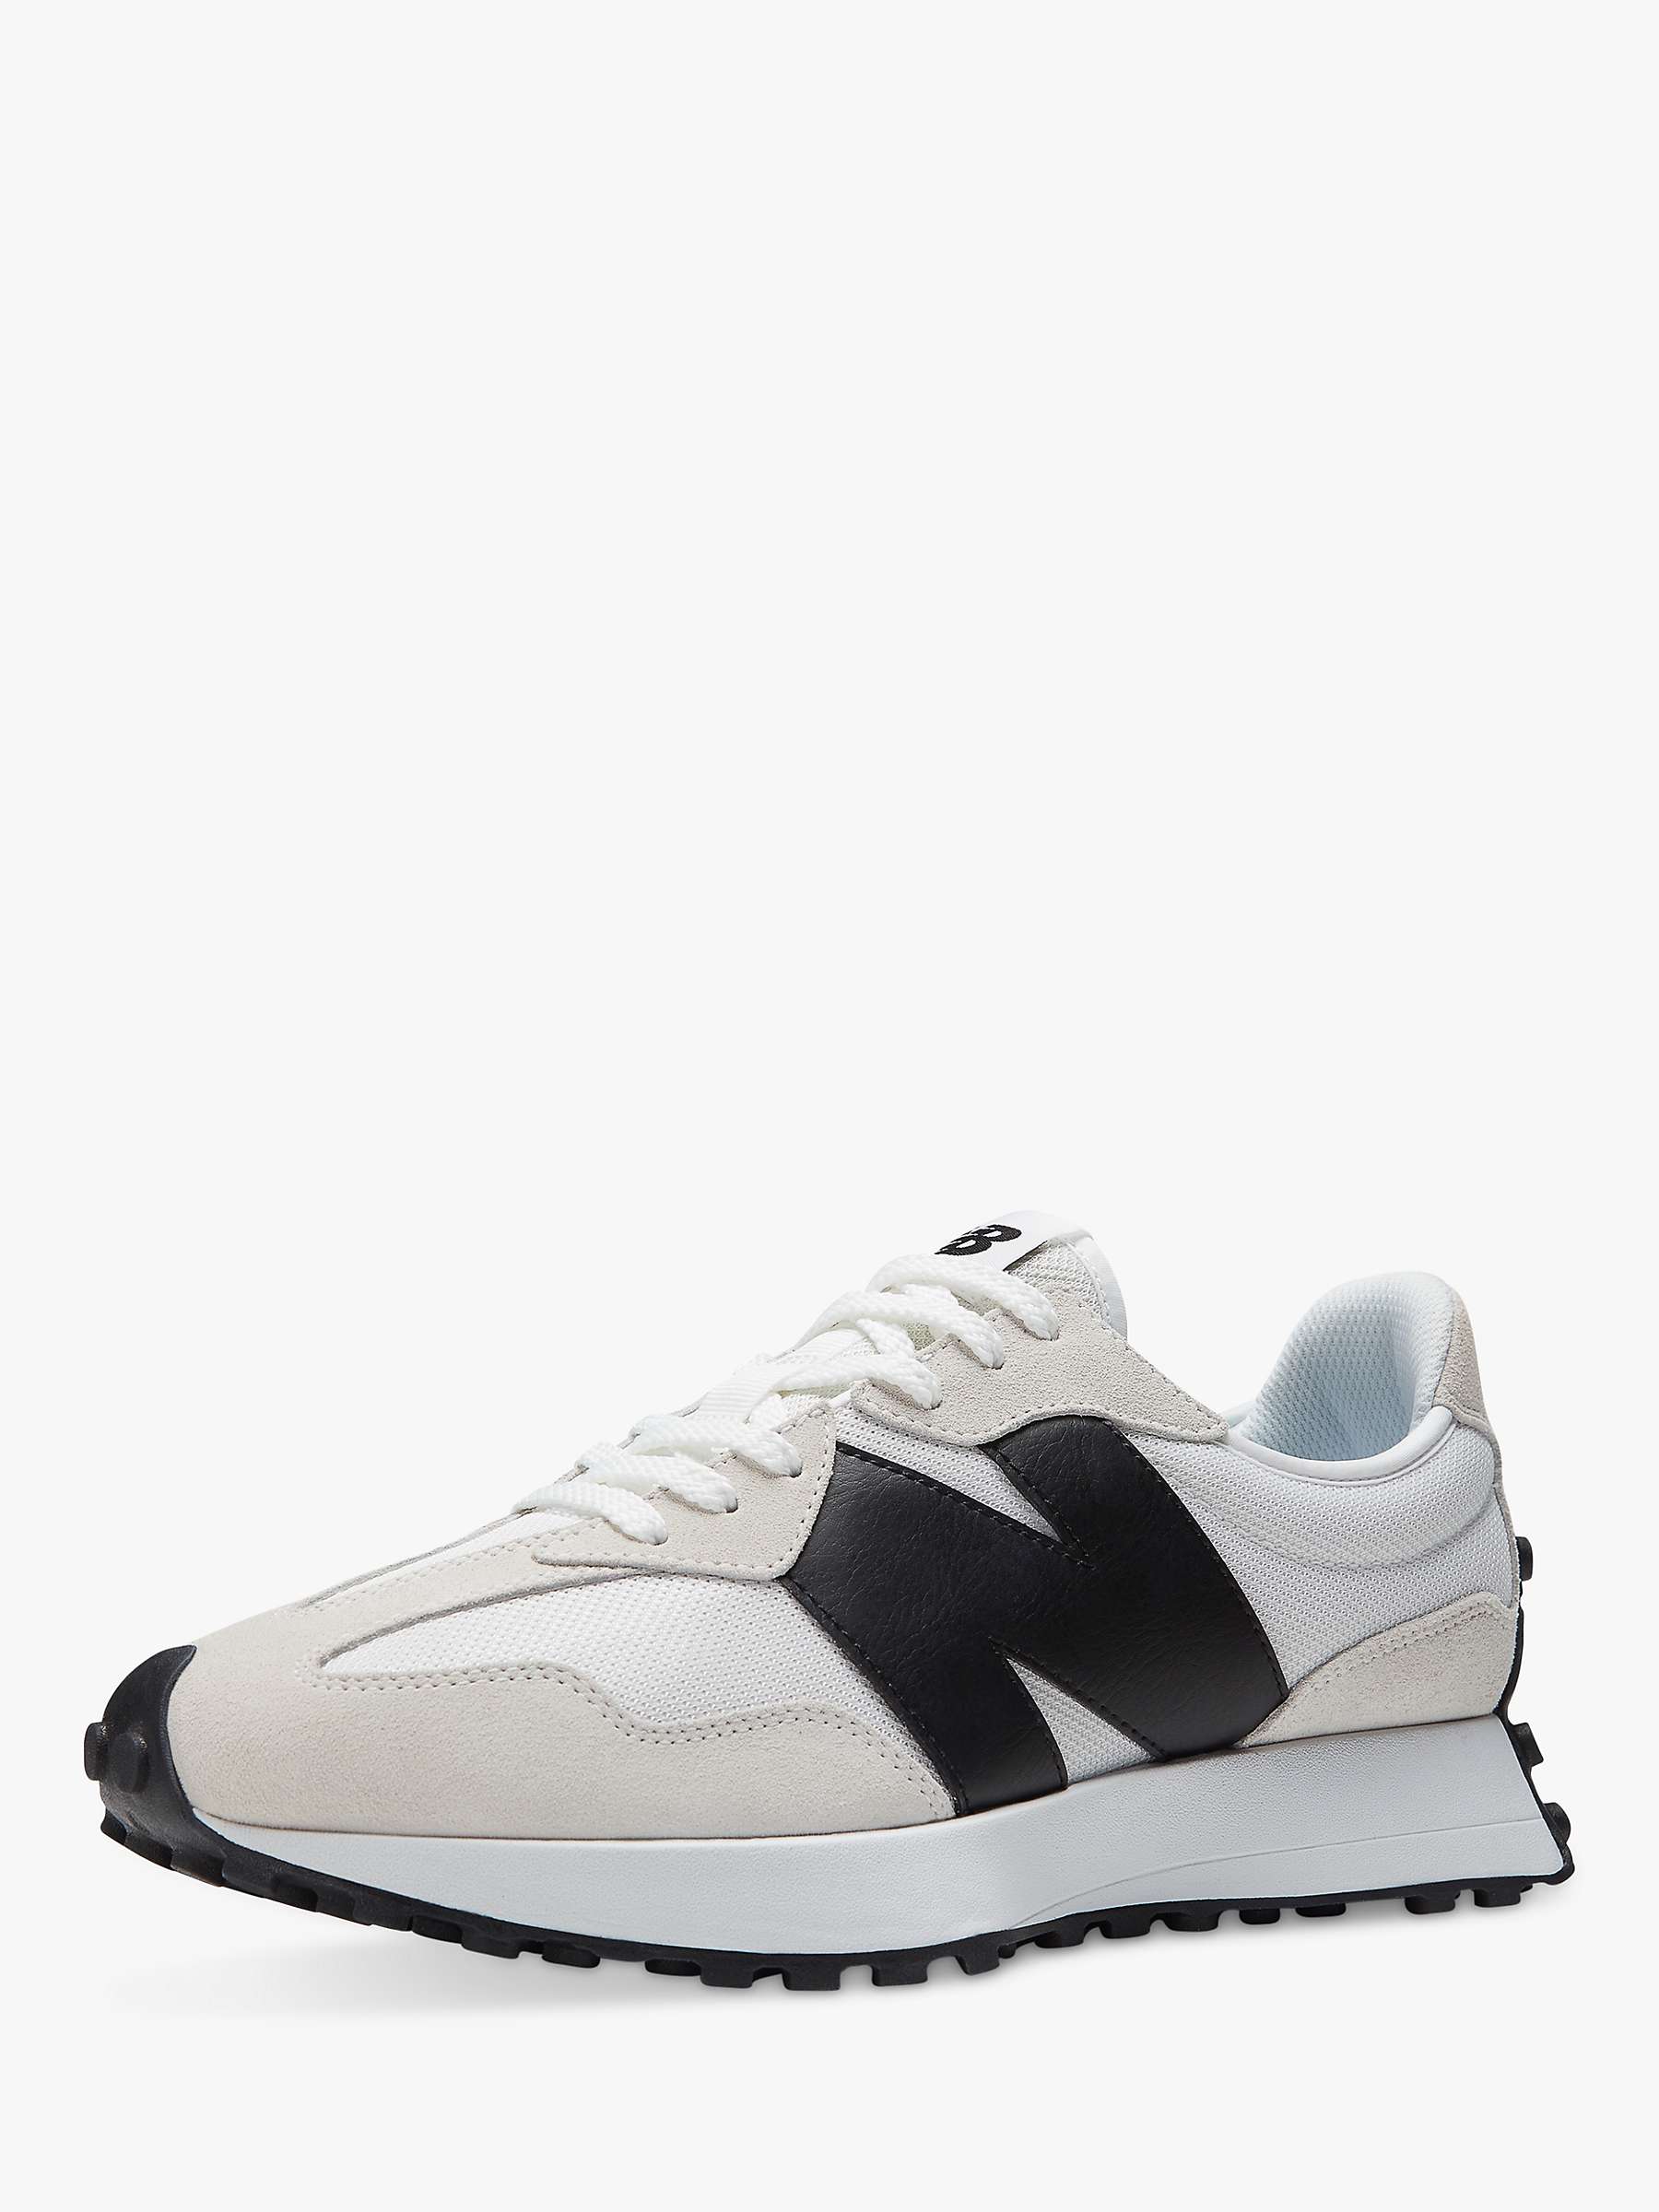 Buy New Balance 327 Retro Trainers Online at johnlewis.com